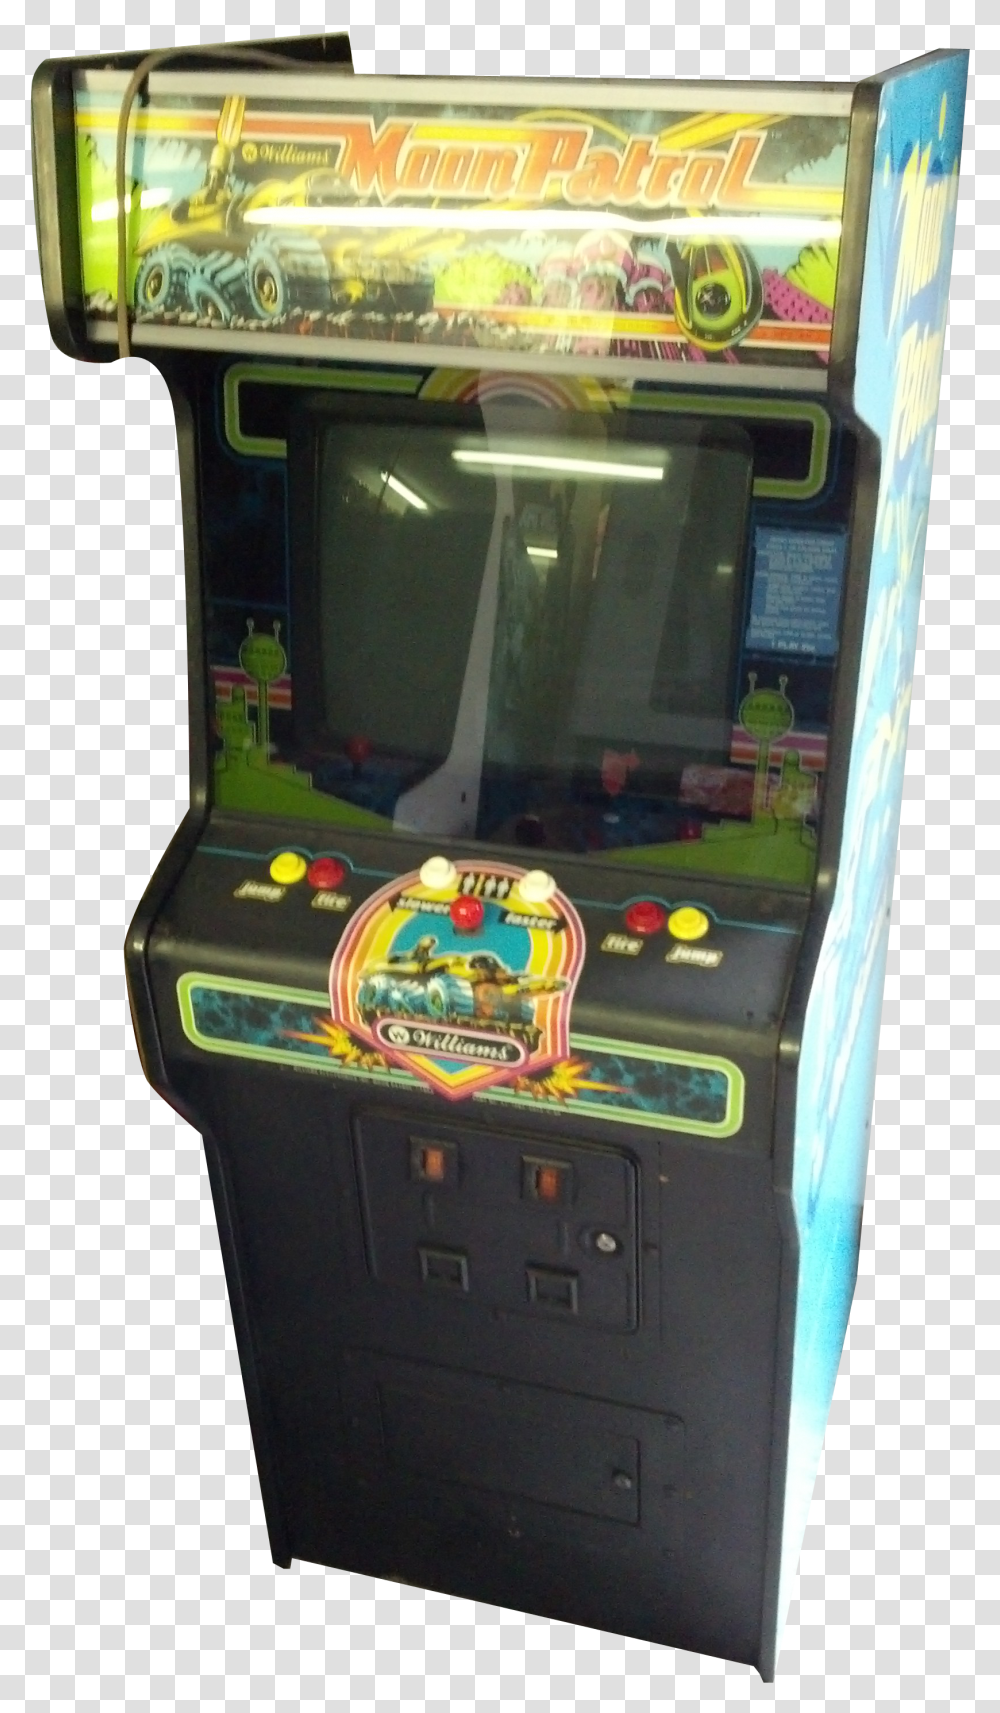 Download Hd Security Video Game Arcade Cabinet Video Game Arcade Cabinet Transparent Png